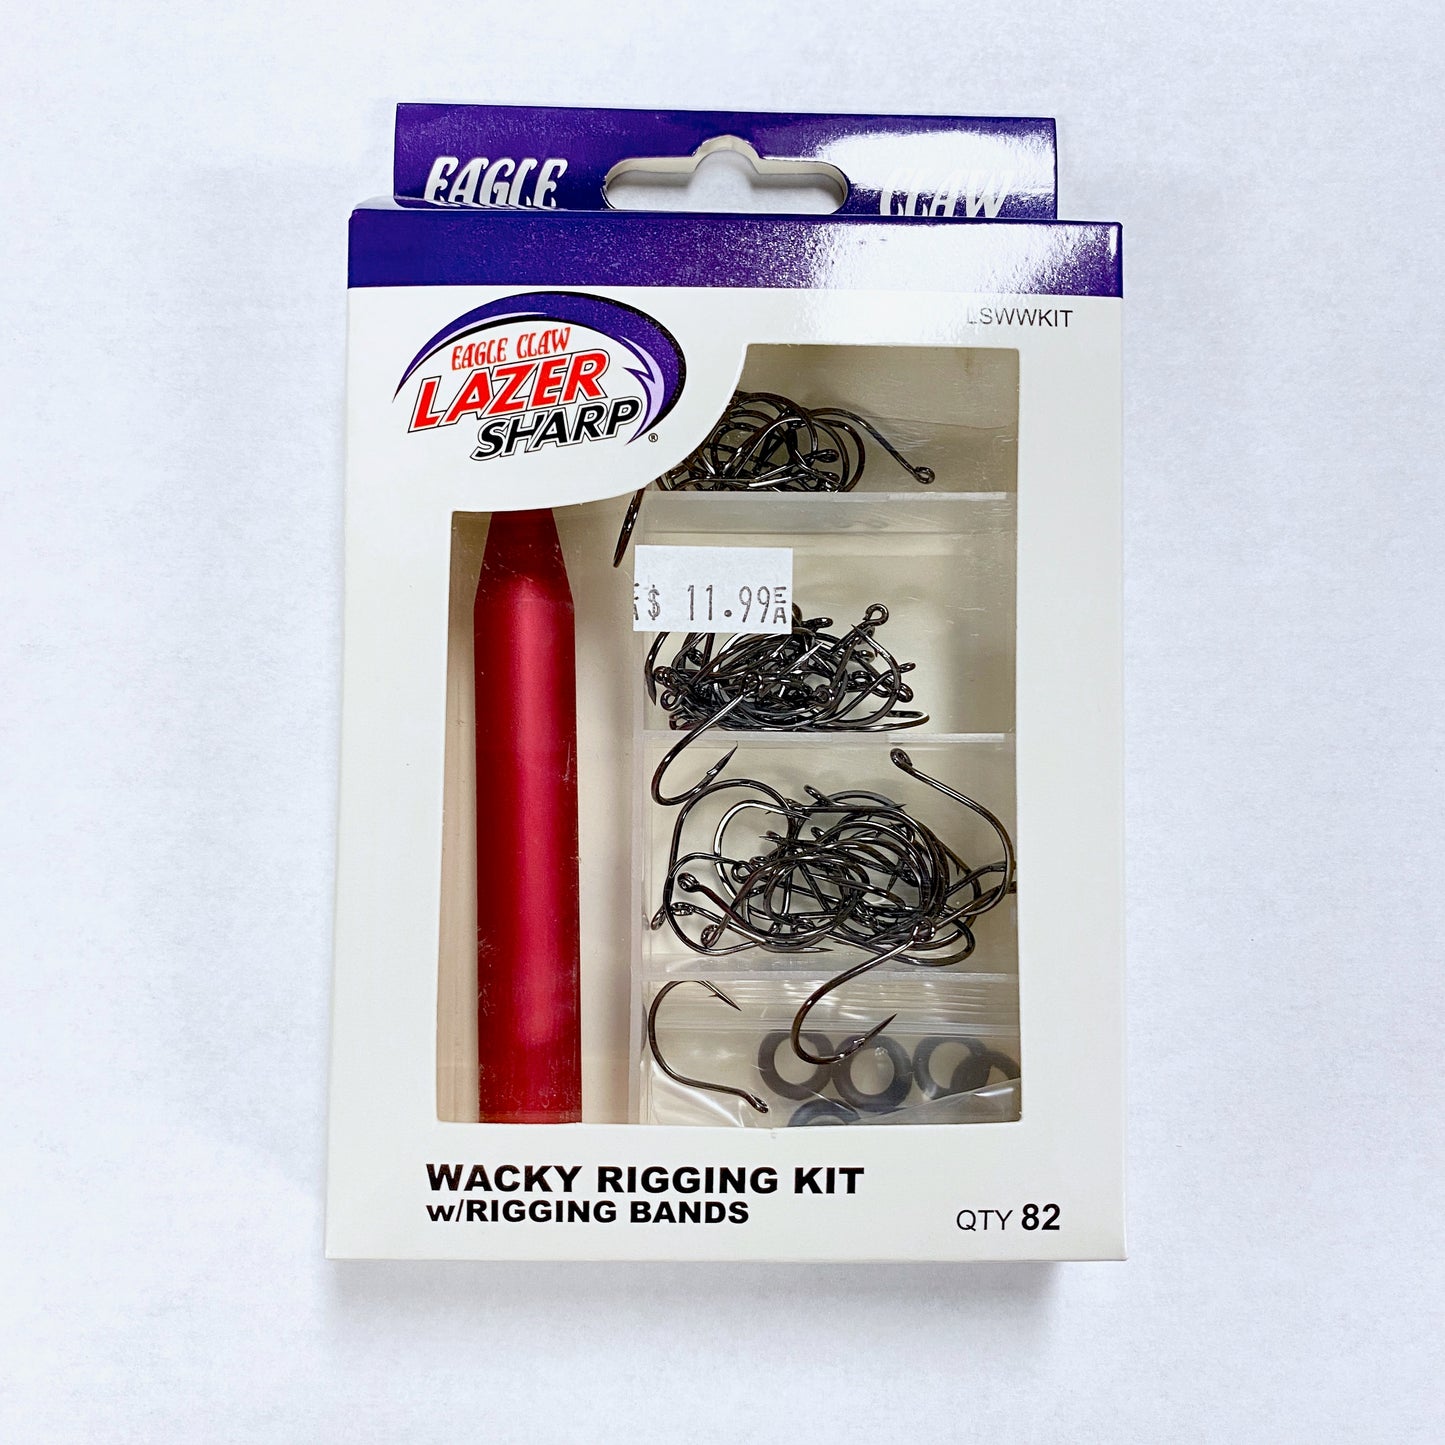 Wacky worm Kit with Rigging Bands